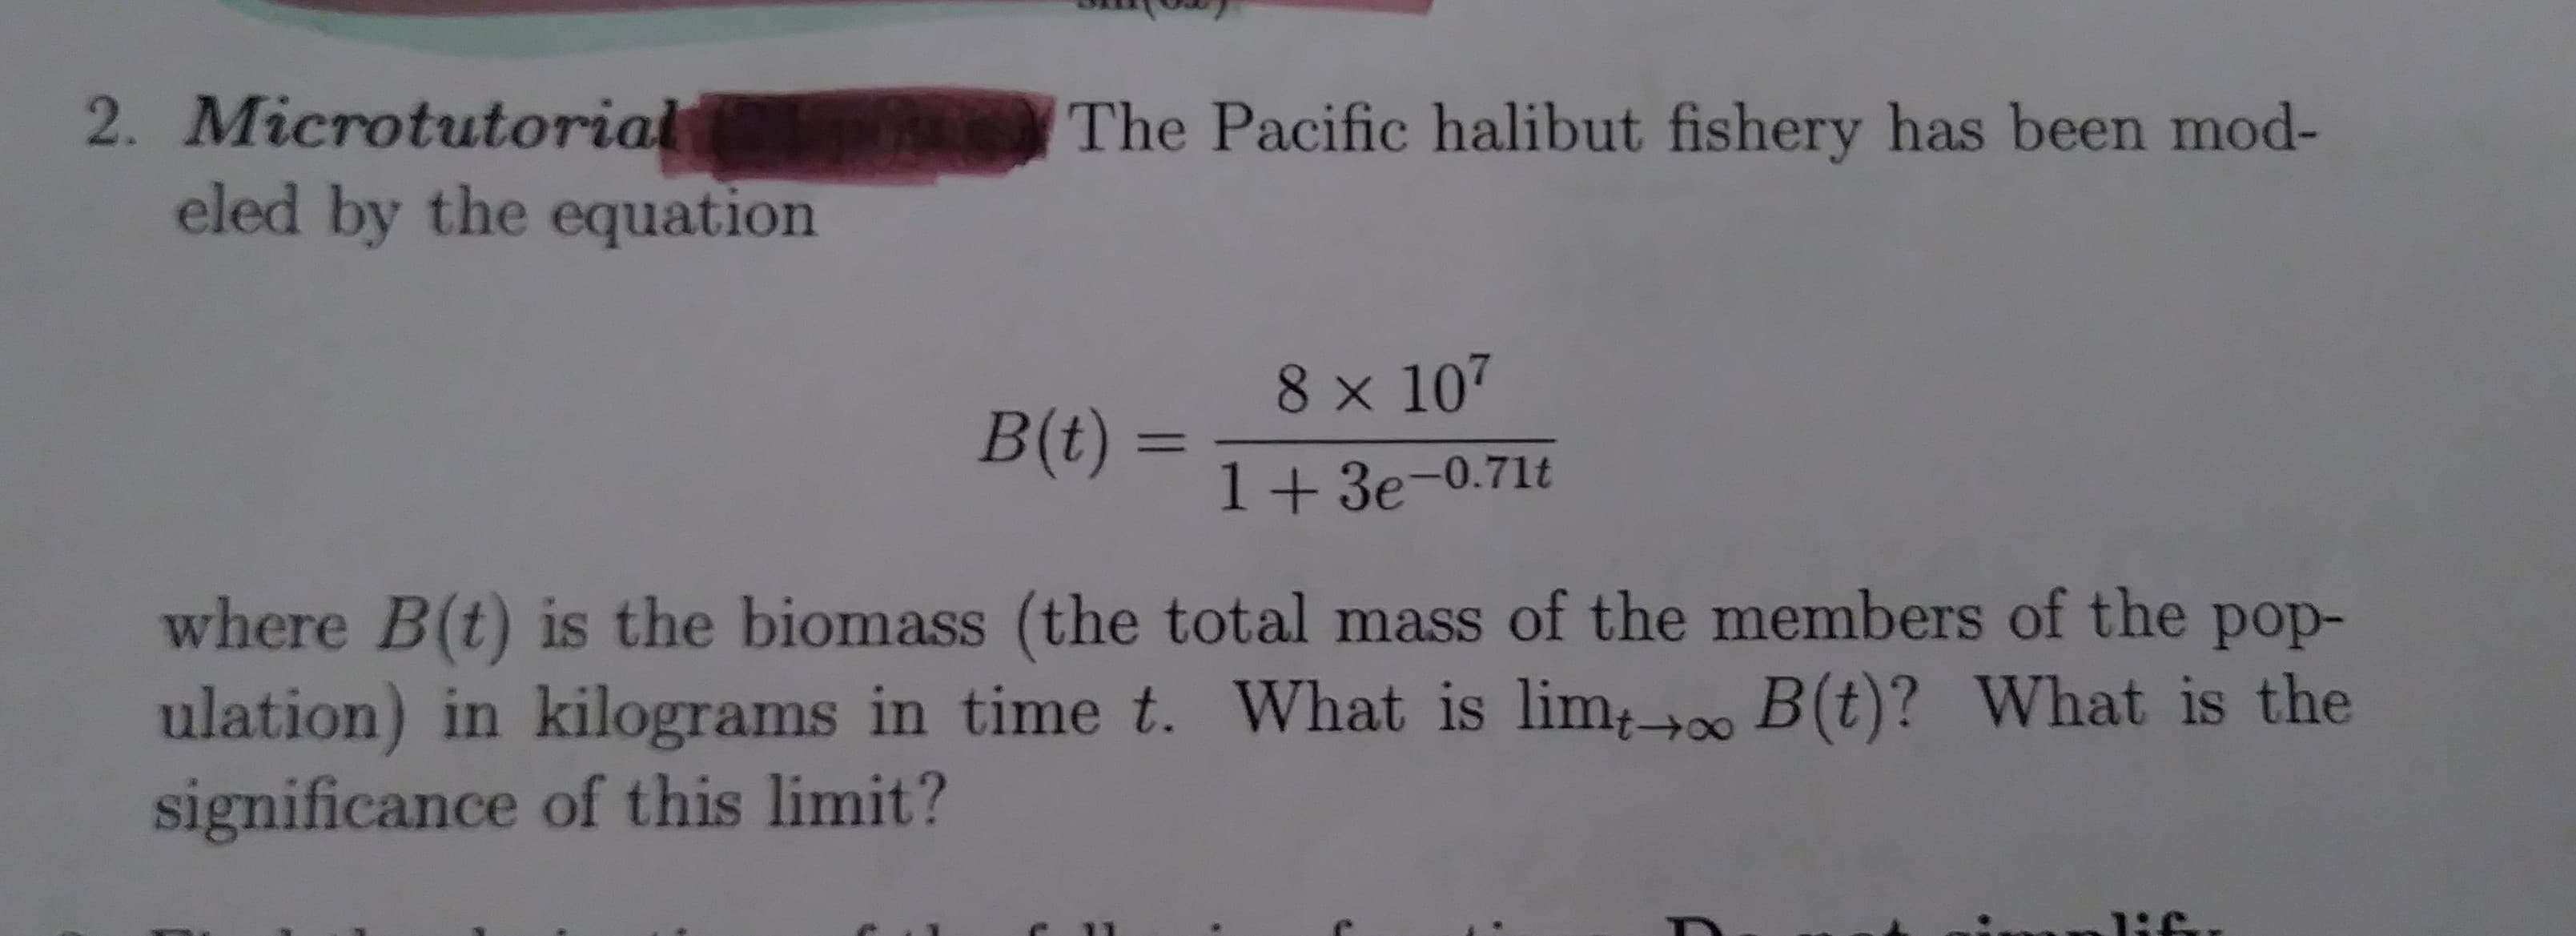 2. Microtutorial
eled by the equation
The Pacific halibut fishery has been mod-
8 x 107
B(t)
11
1 +3e-0.71t
where B(t) is the biomass (the total mass of the members of the pop-
ulation) in kilograms in time t. What is lim,o B (t)? What is the
significance of this limit?
1:
